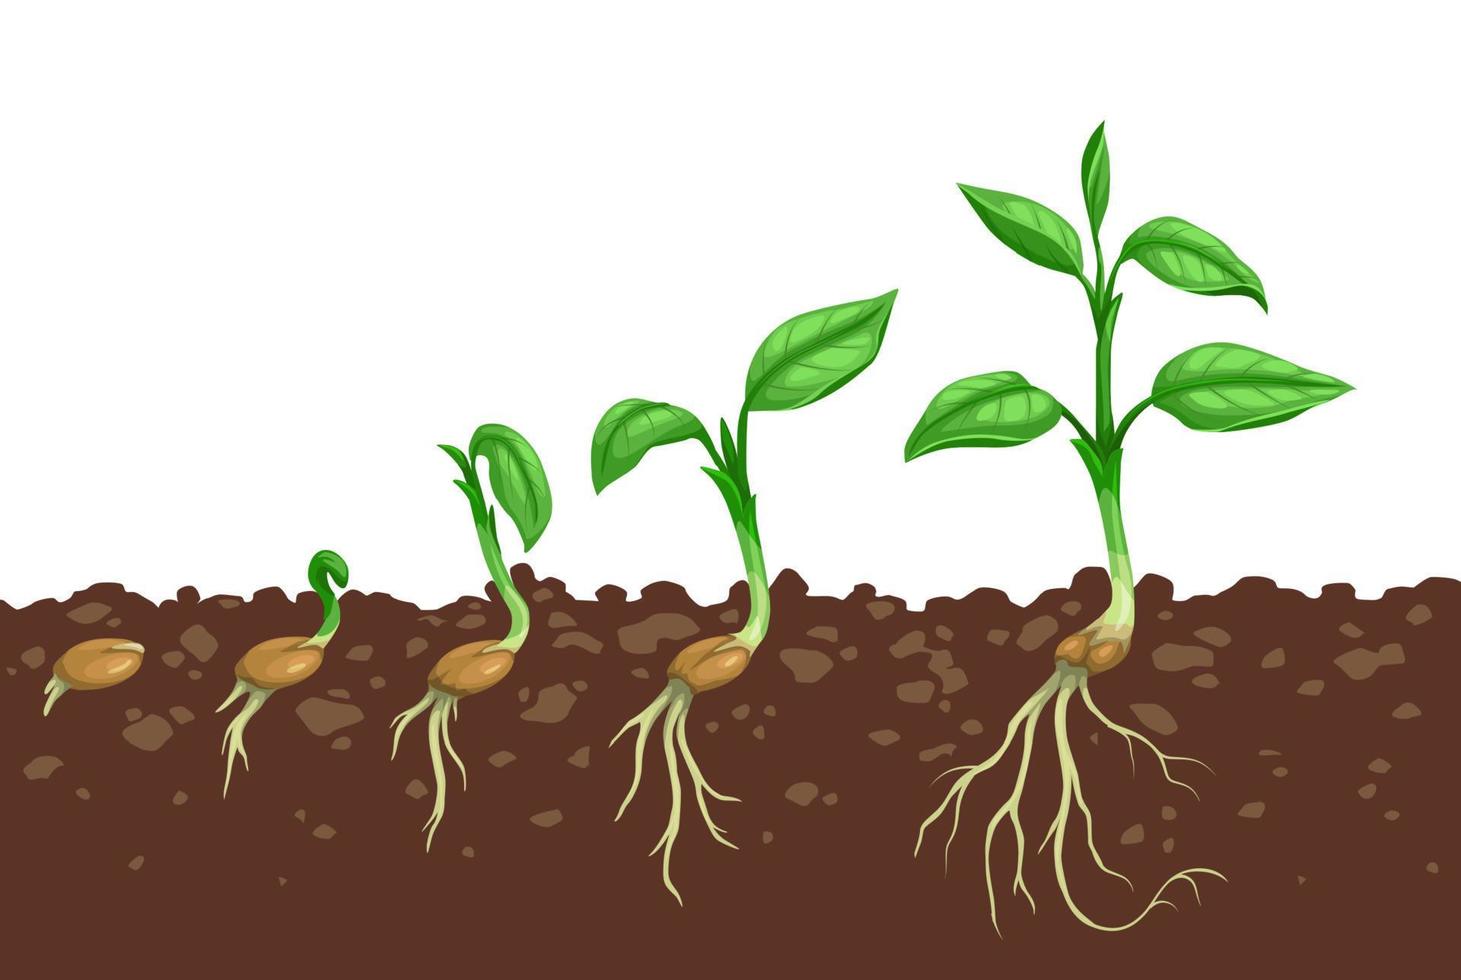 Plant growth steps, seed germination in soil vector